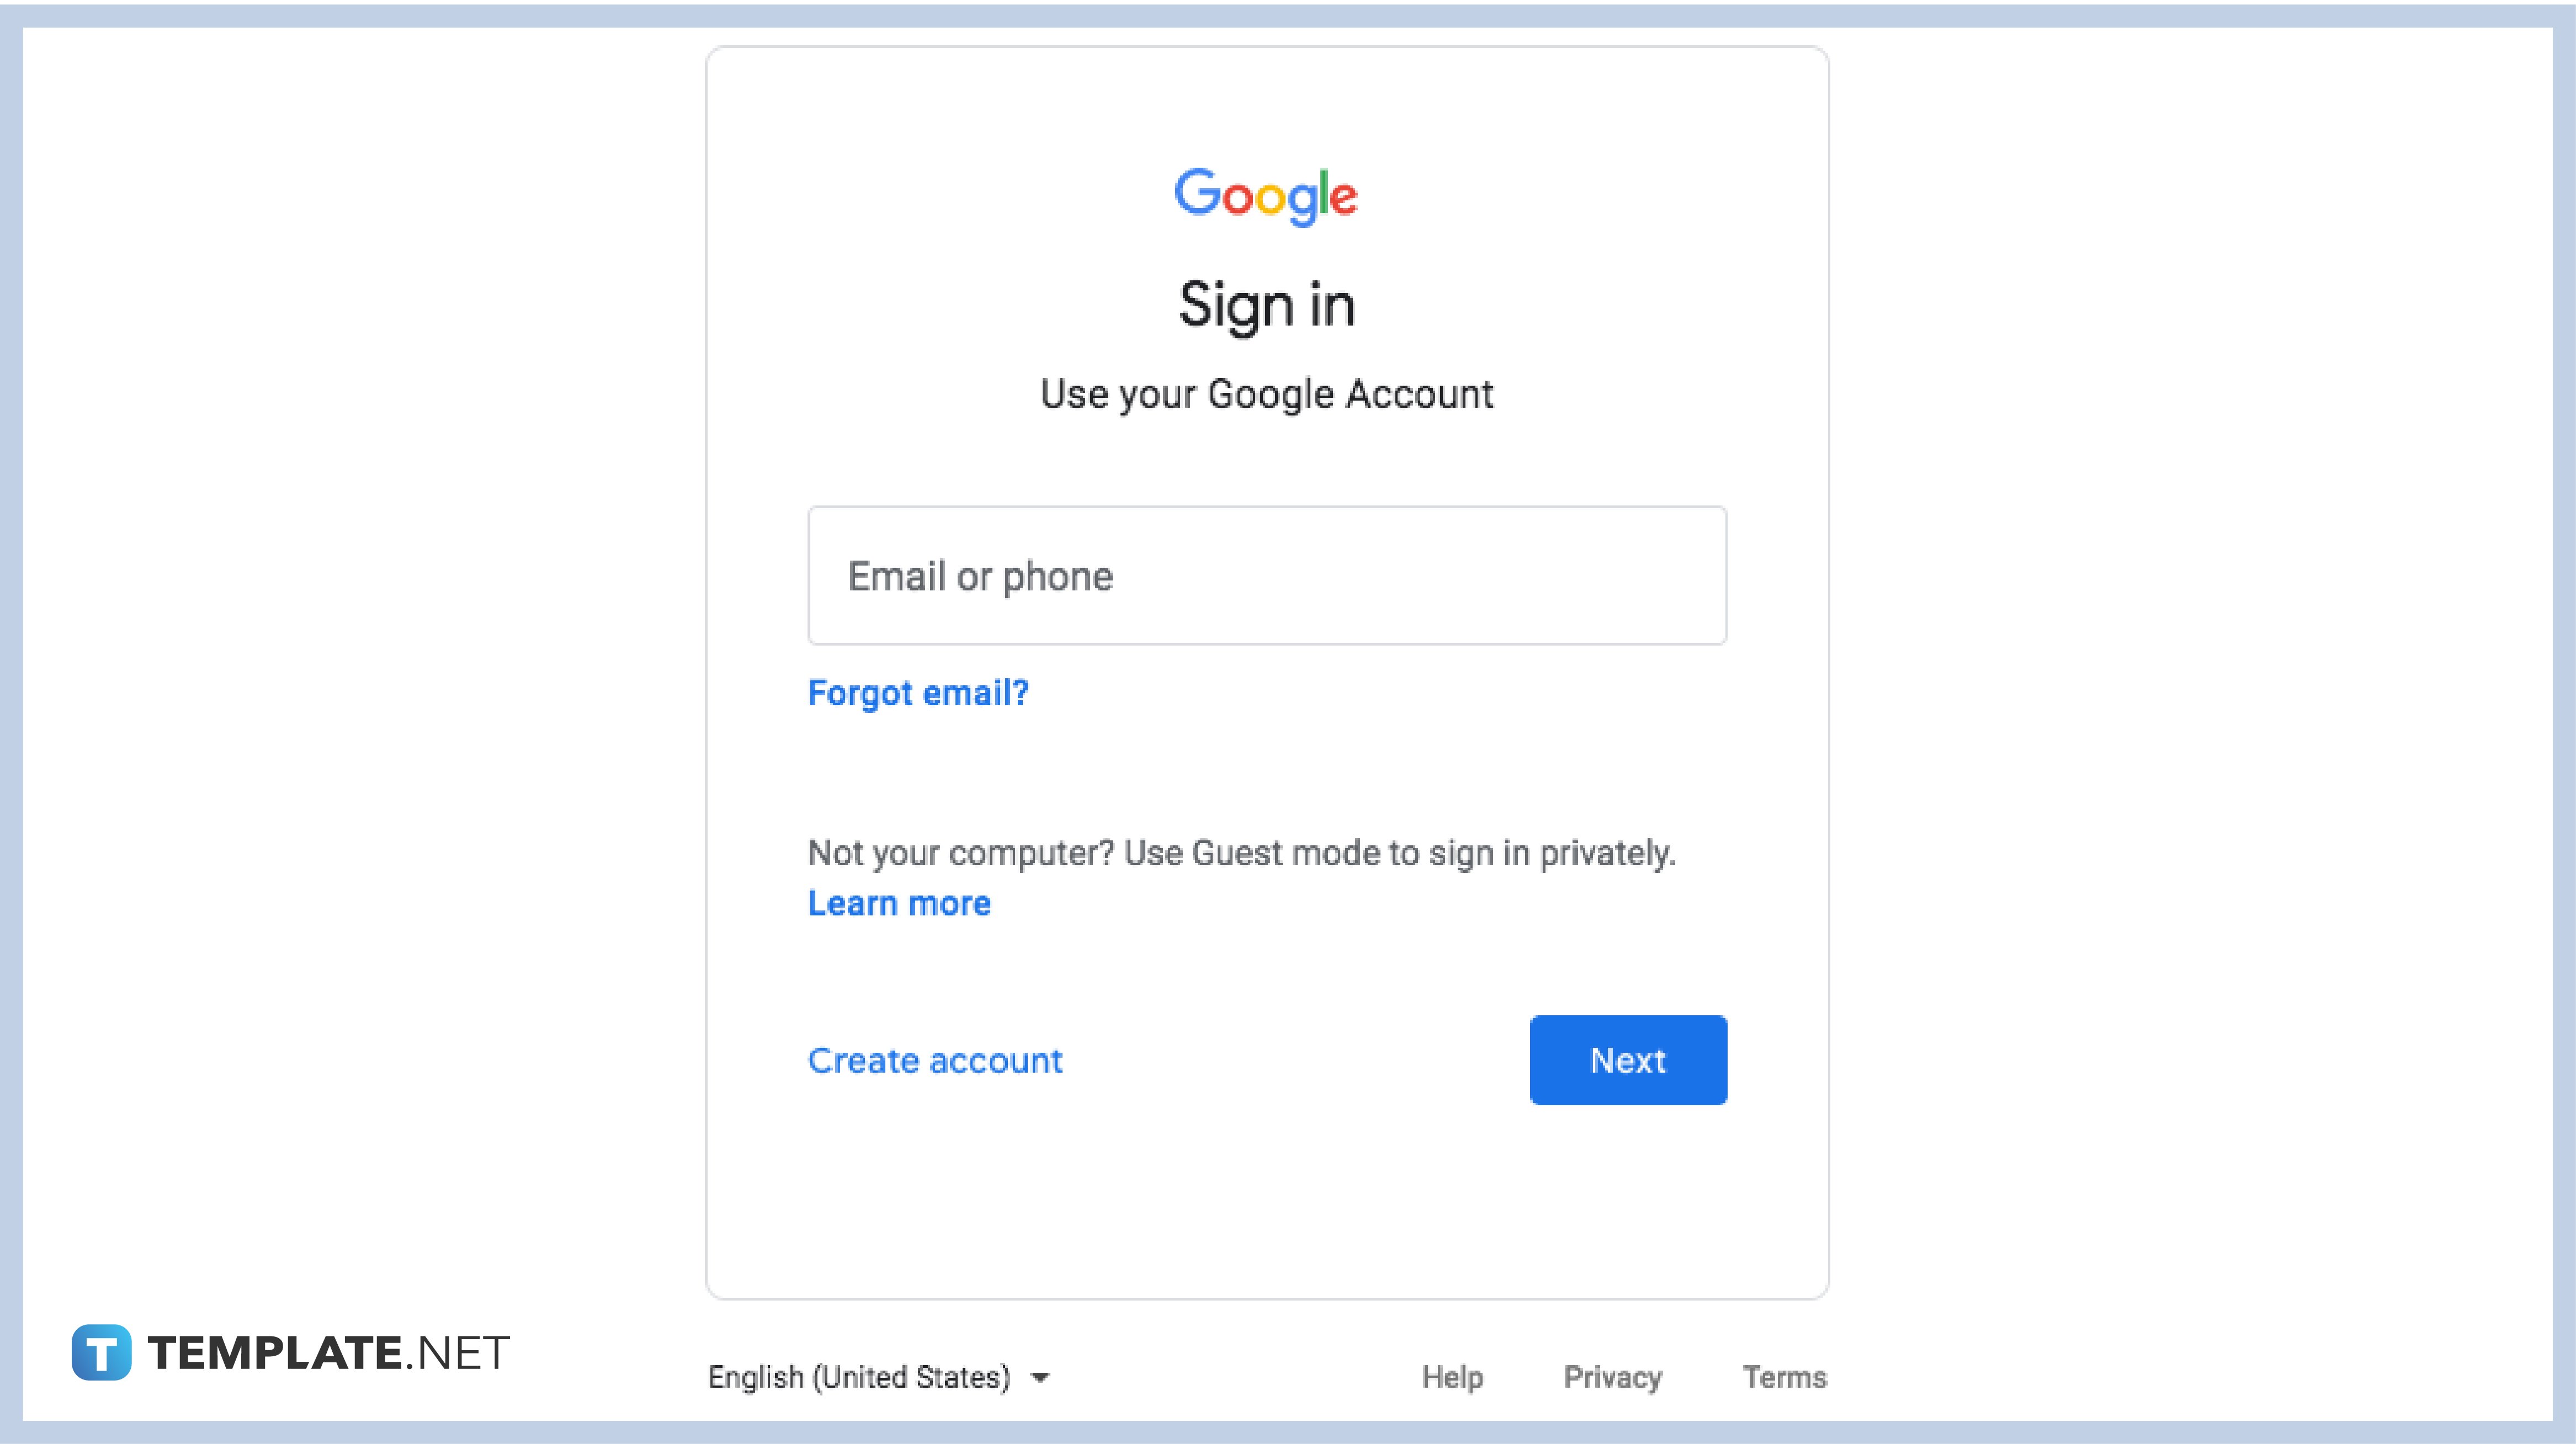 step-1-sign-in-with-your-account-011